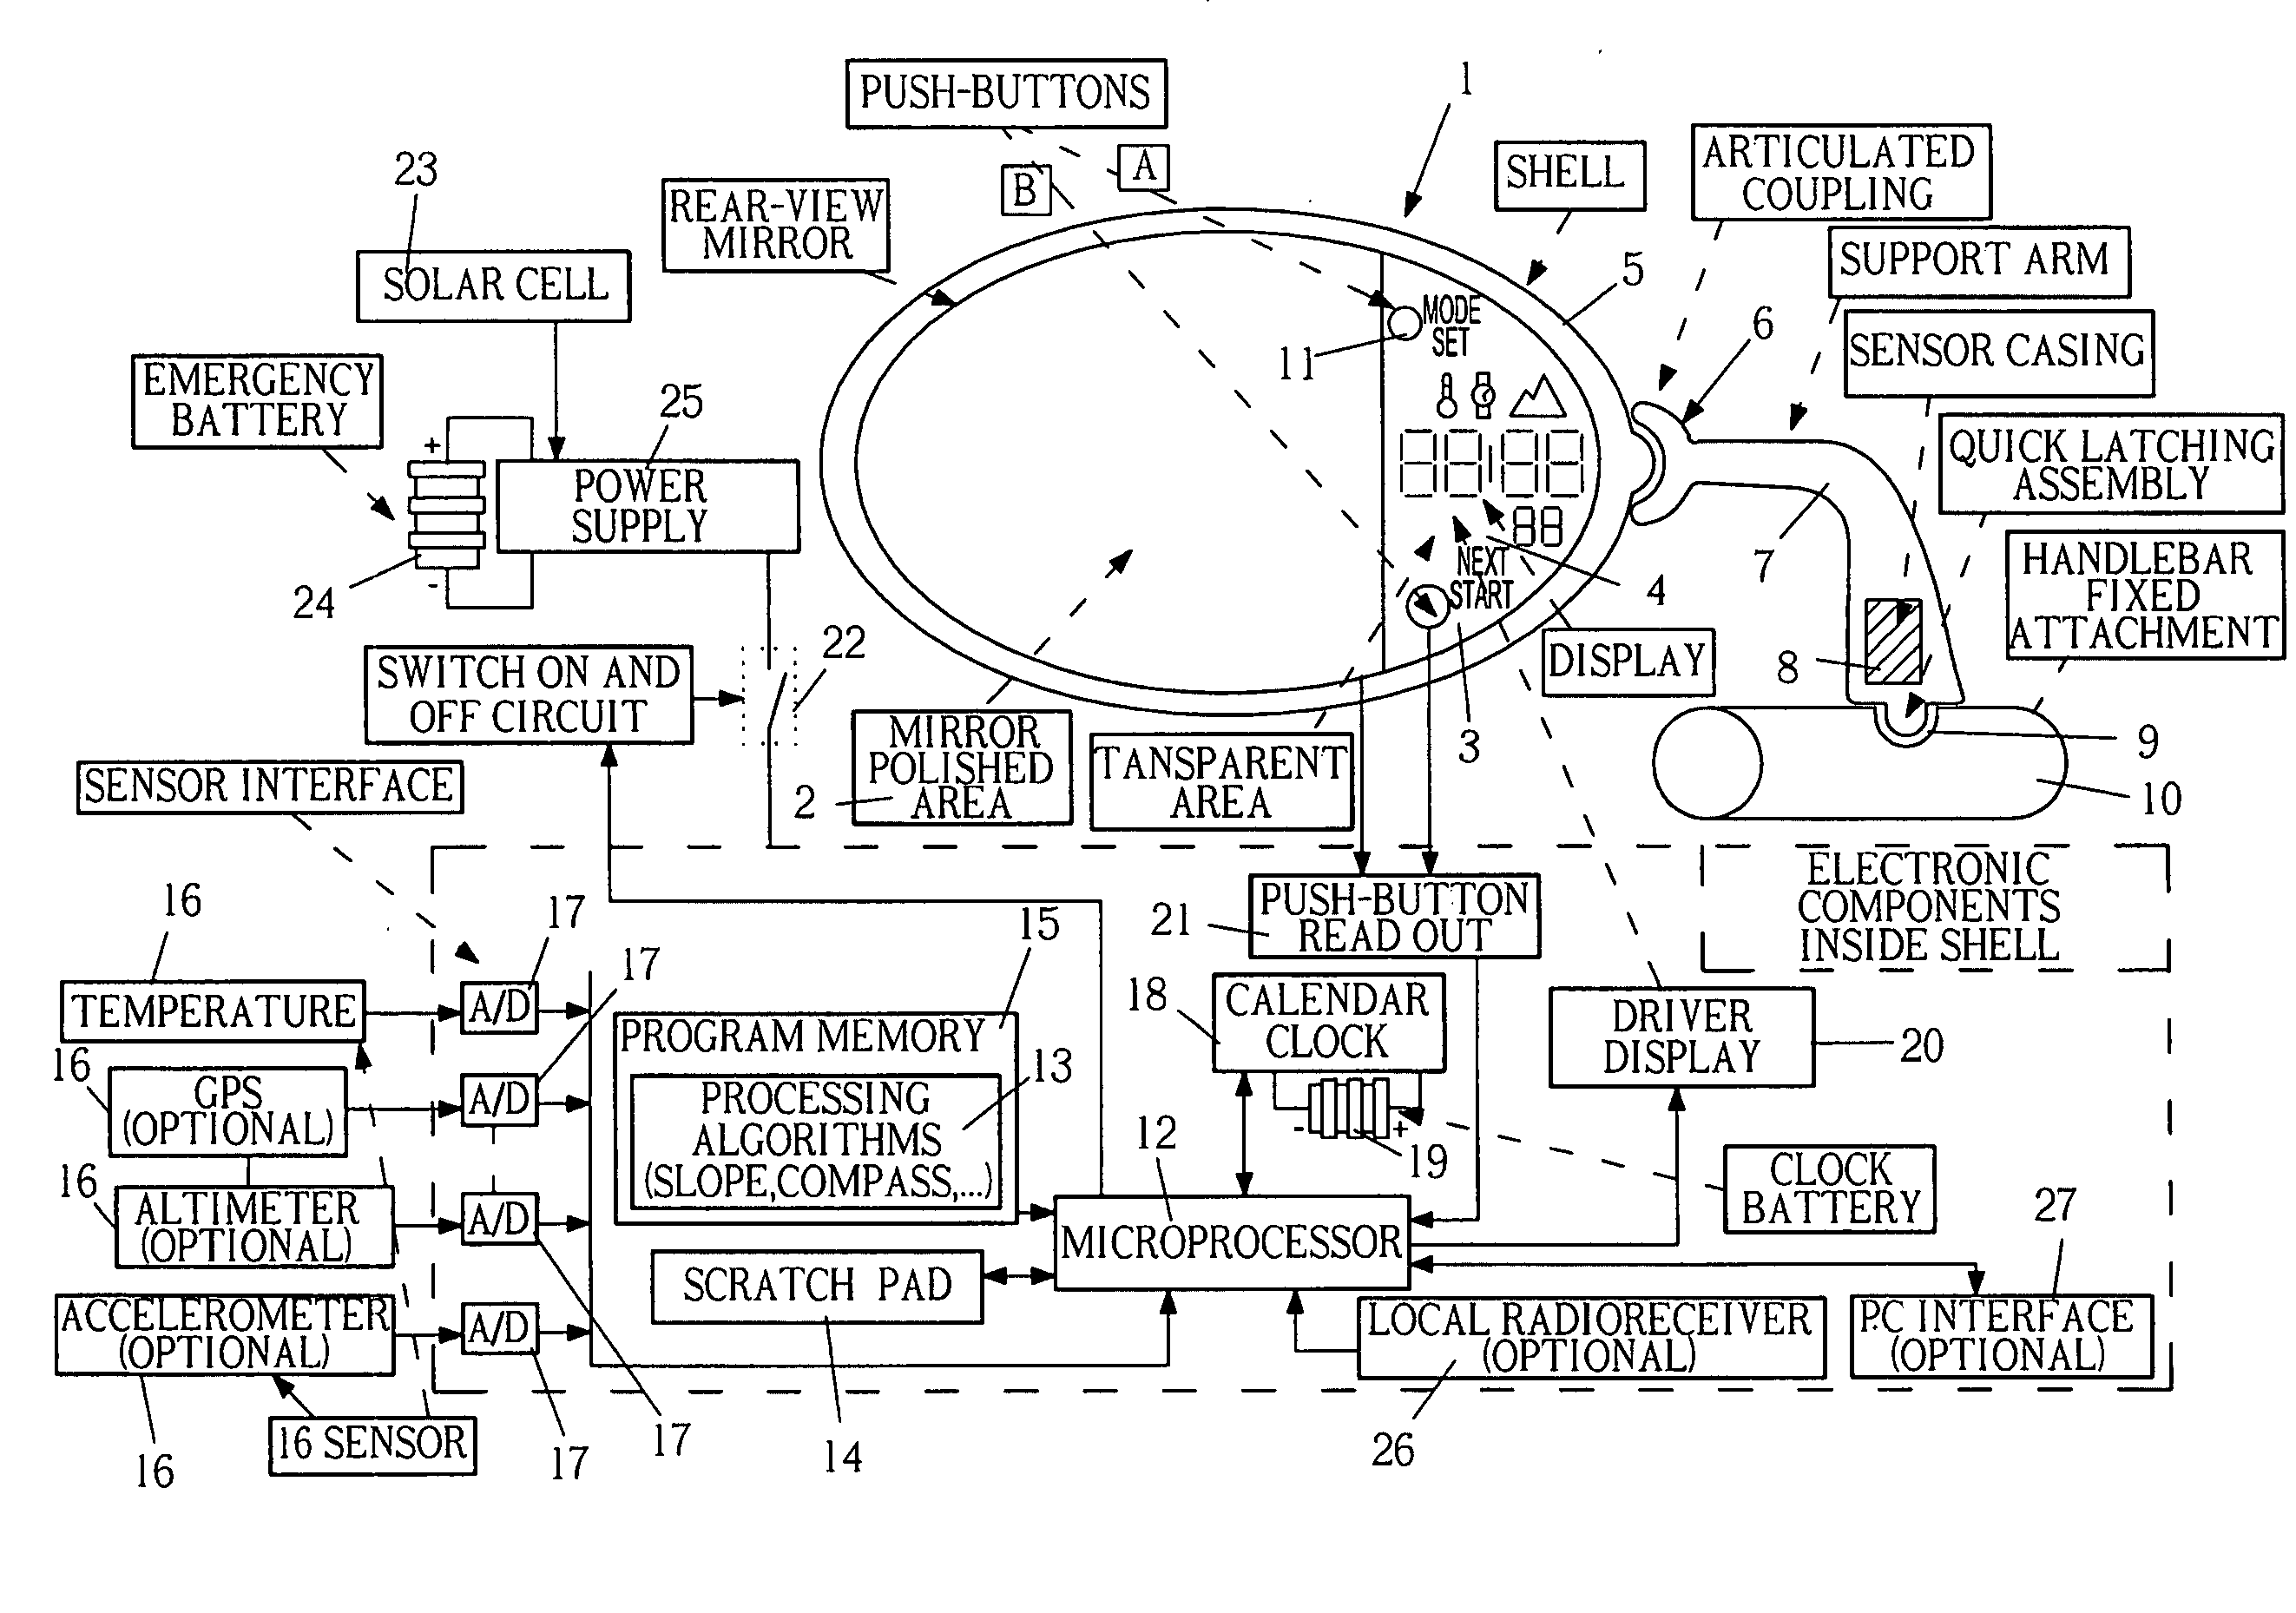 Multifunctional device for vehicles